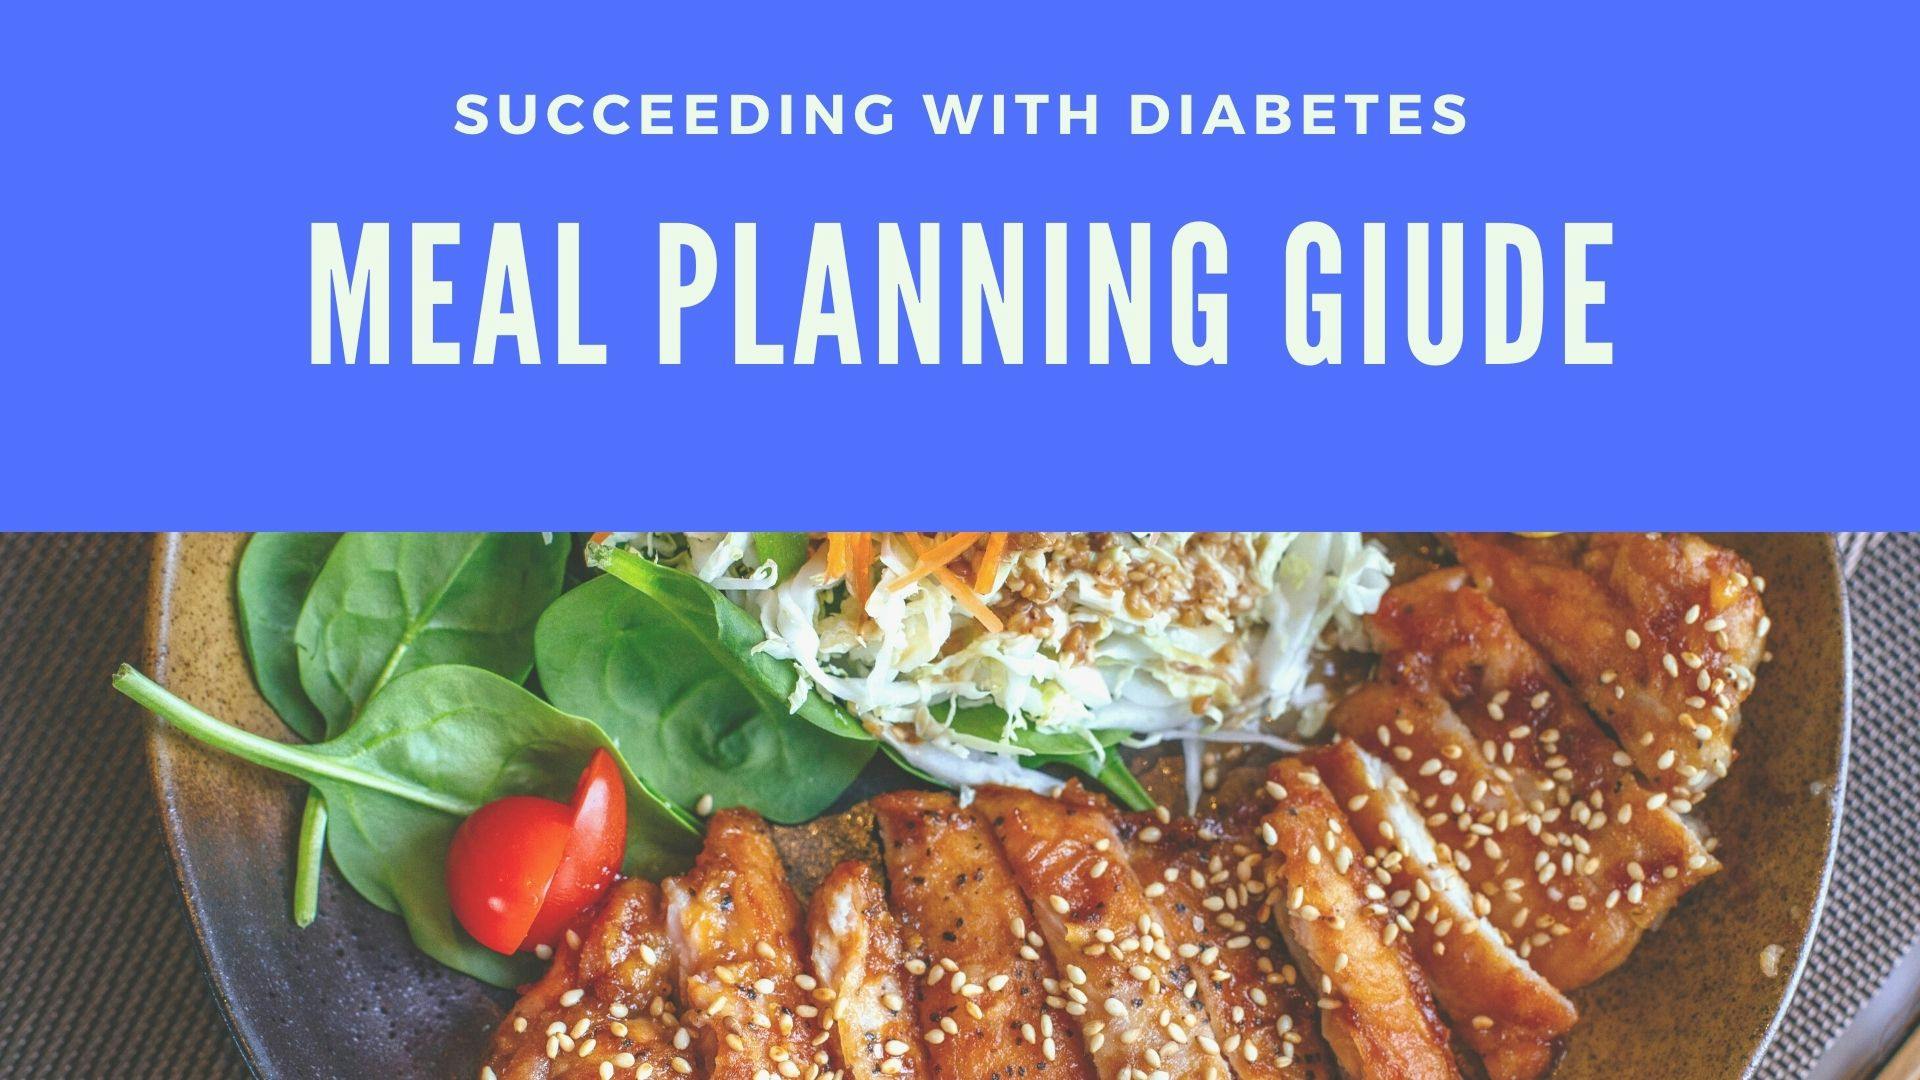 Dr. Wards Diabetes Meal Planning Guide